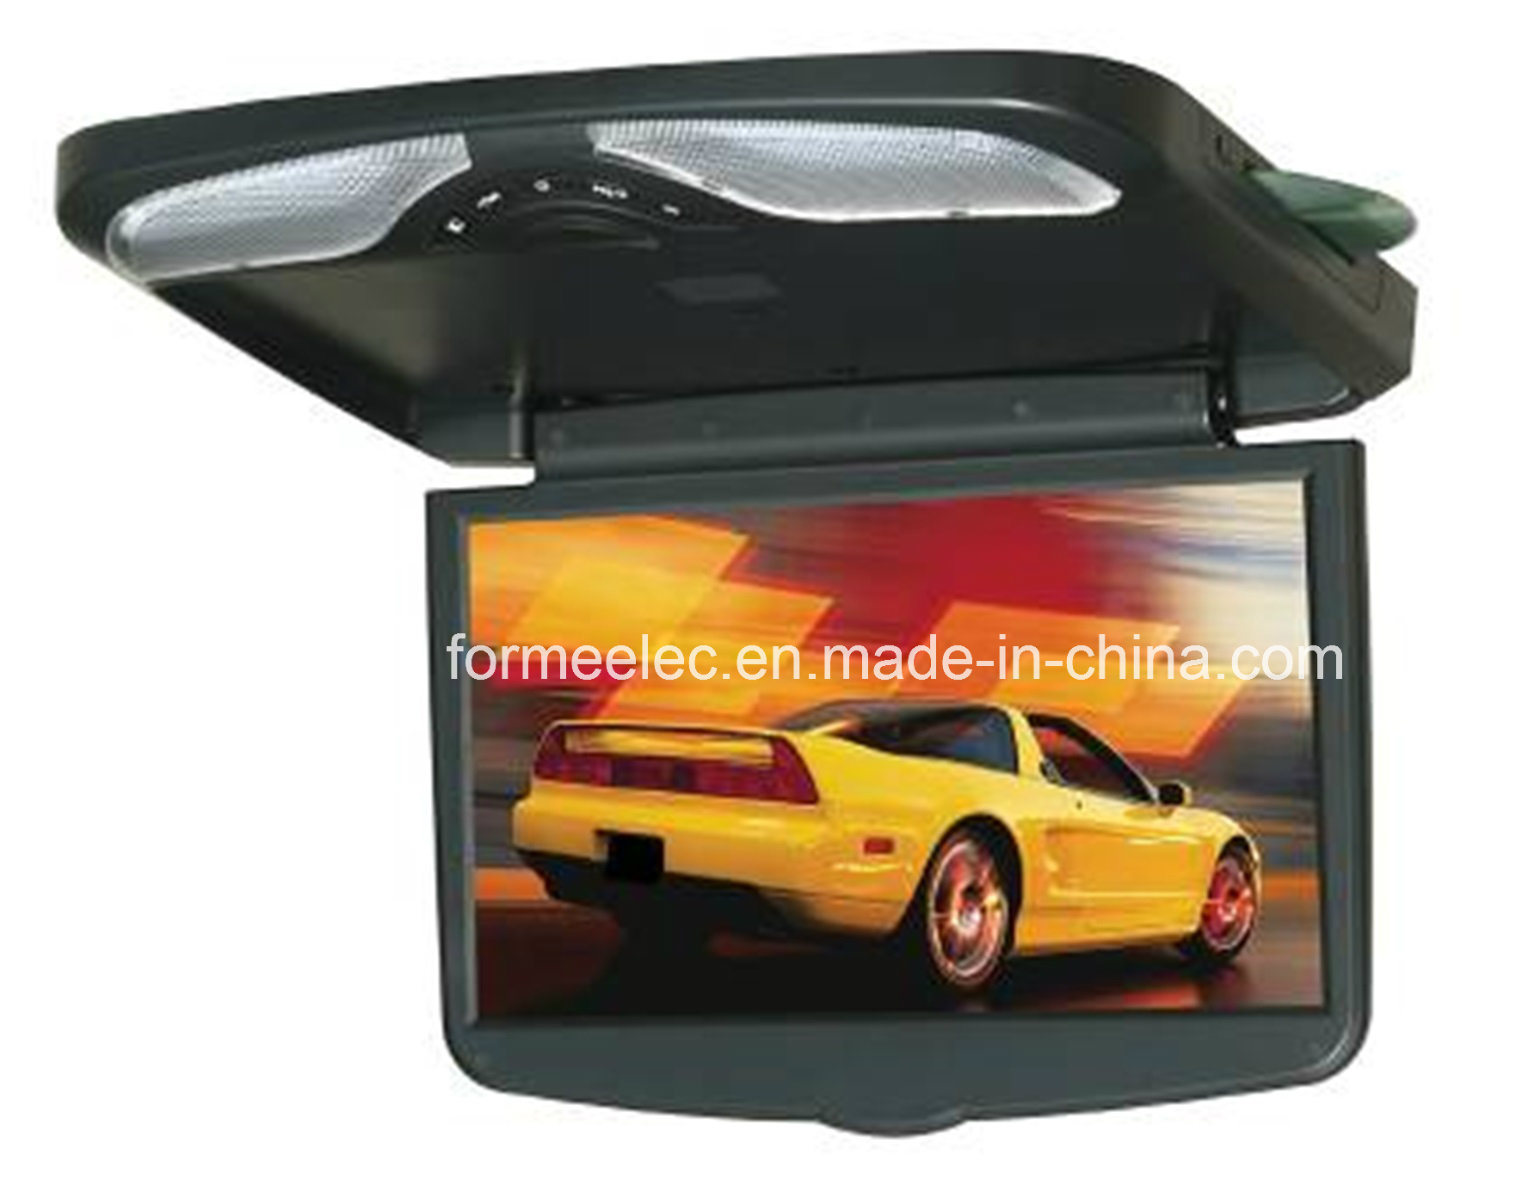 15.6 Inch Car DVD Player Flipdown Roof Car Monitor with Optional TV